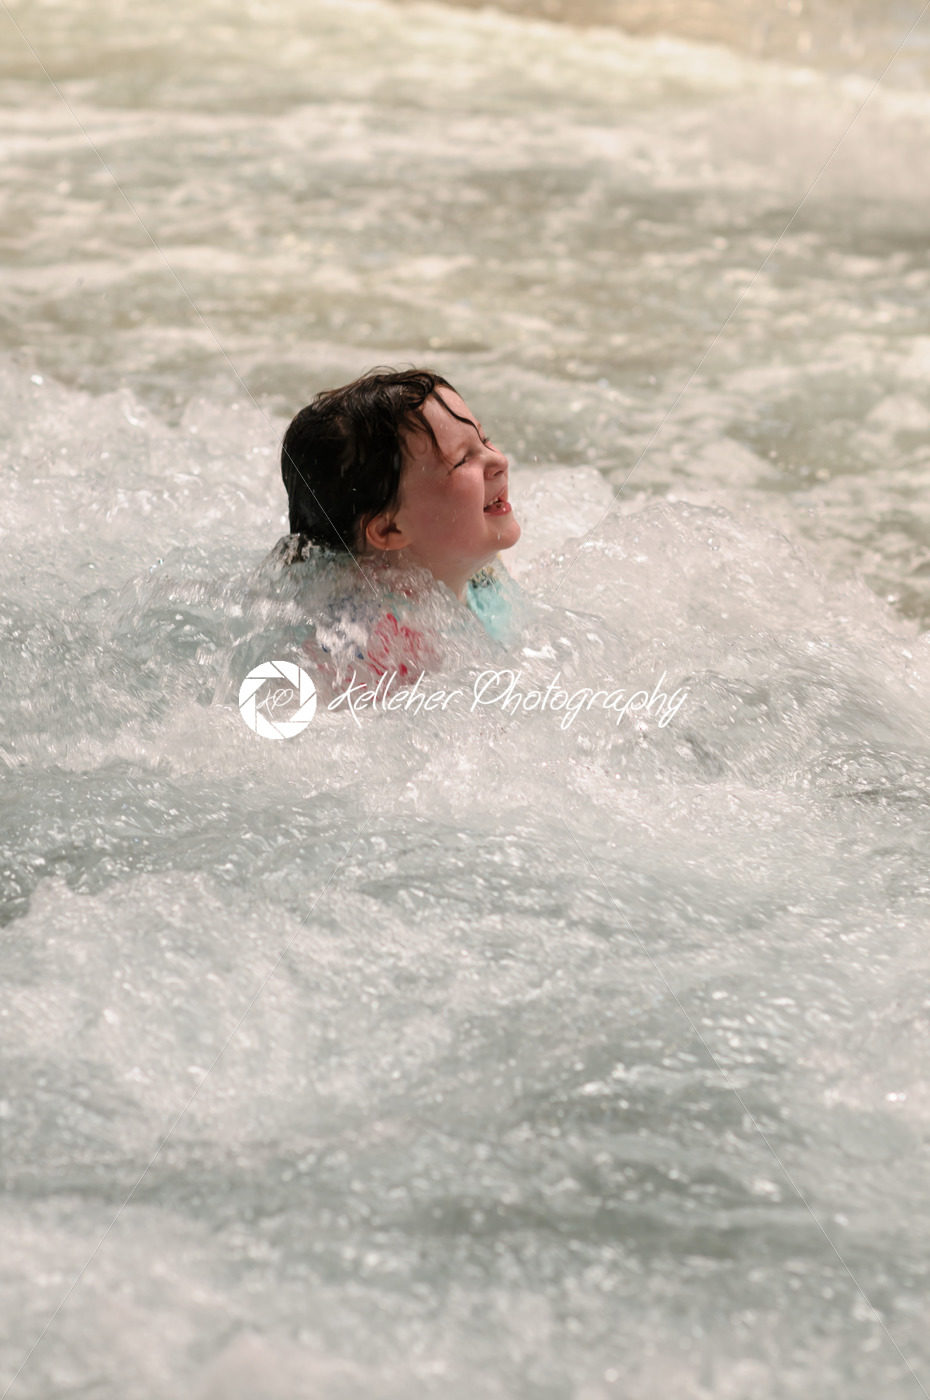 Little girl swimming indoors in big sport wave pool. - Kelleher Photography Store